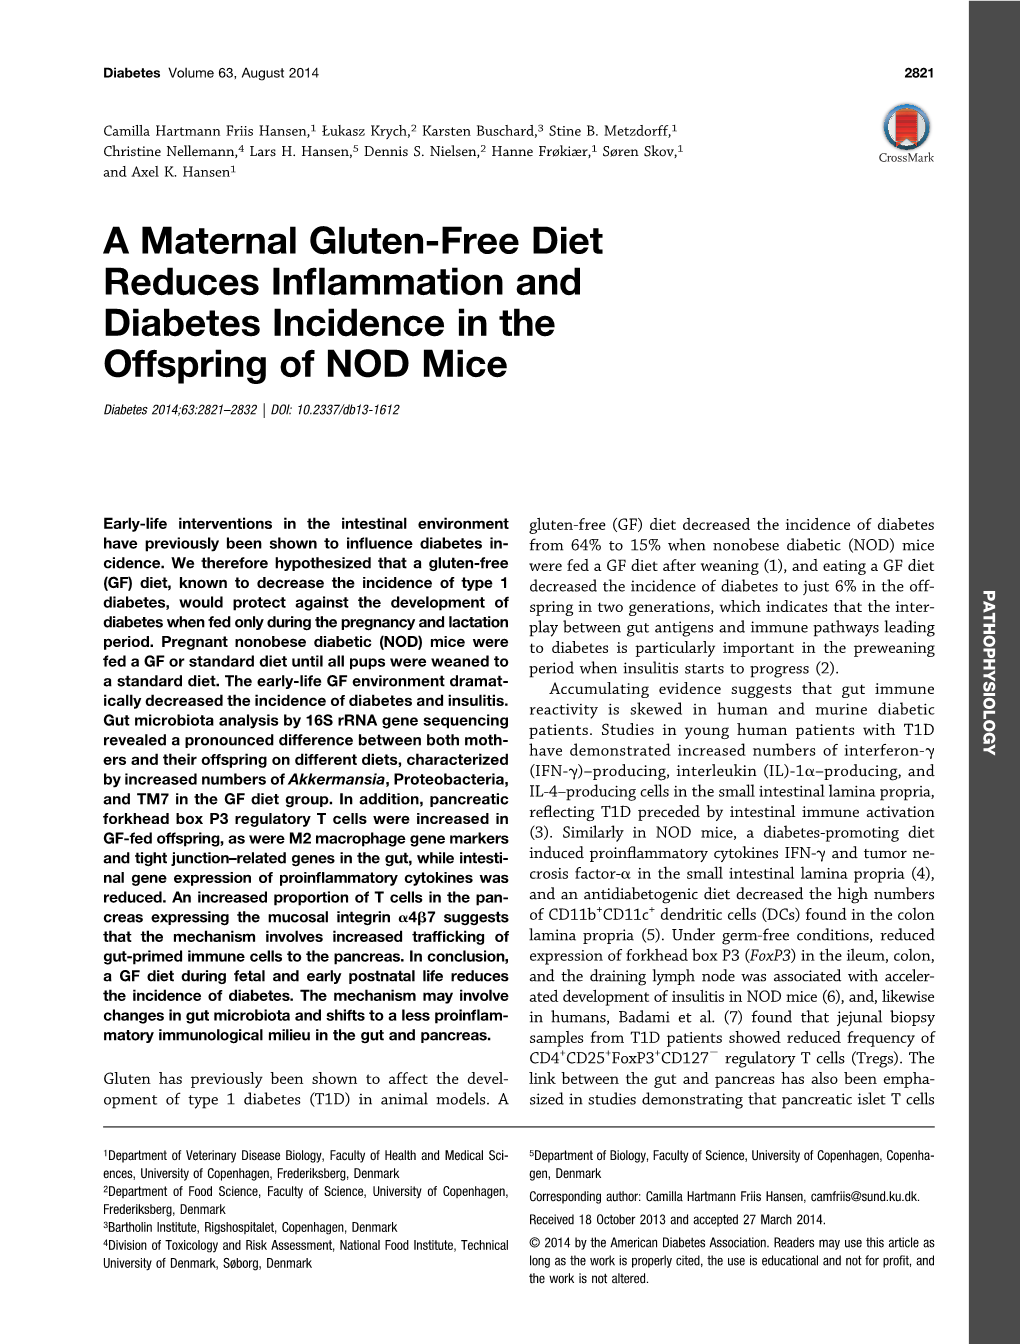 A Maternal Gluten-Free Diet Reduces Inflammation and Diabetes